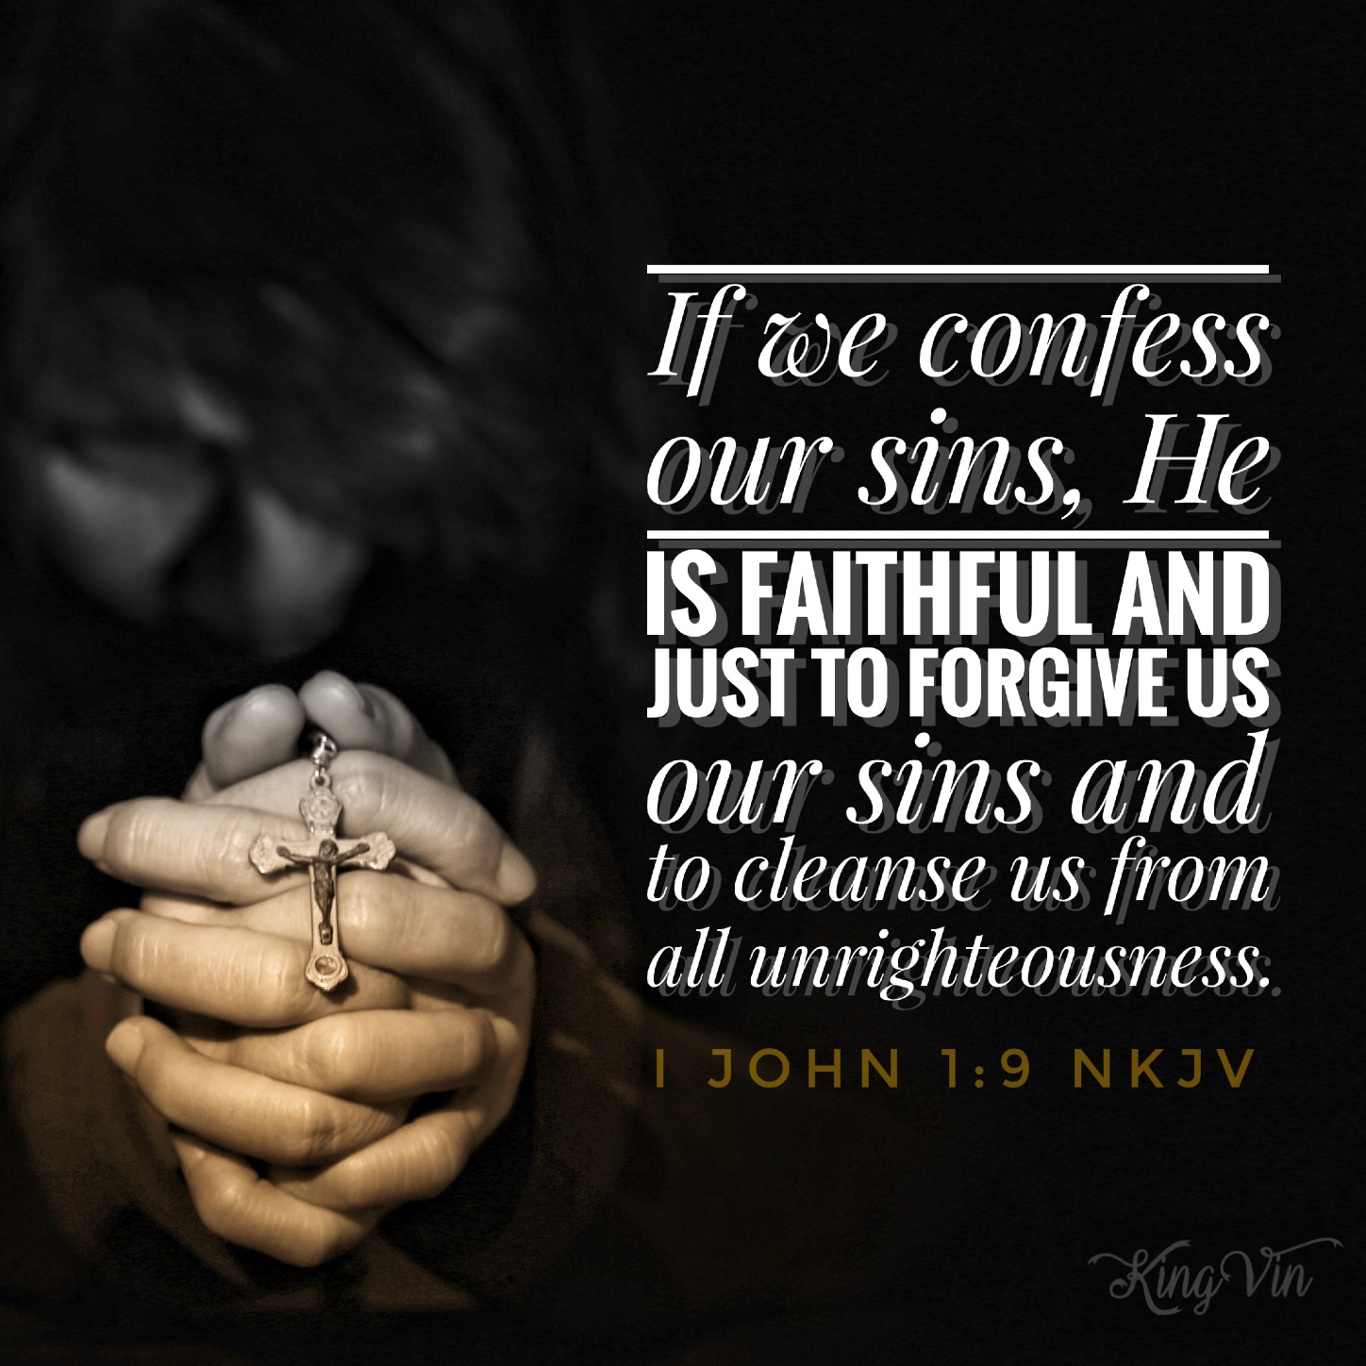 If we confess our sins, He is faithful and just to forgive us our sins and to cleanse us from all unrighteousness. I John 1:9 NKJV